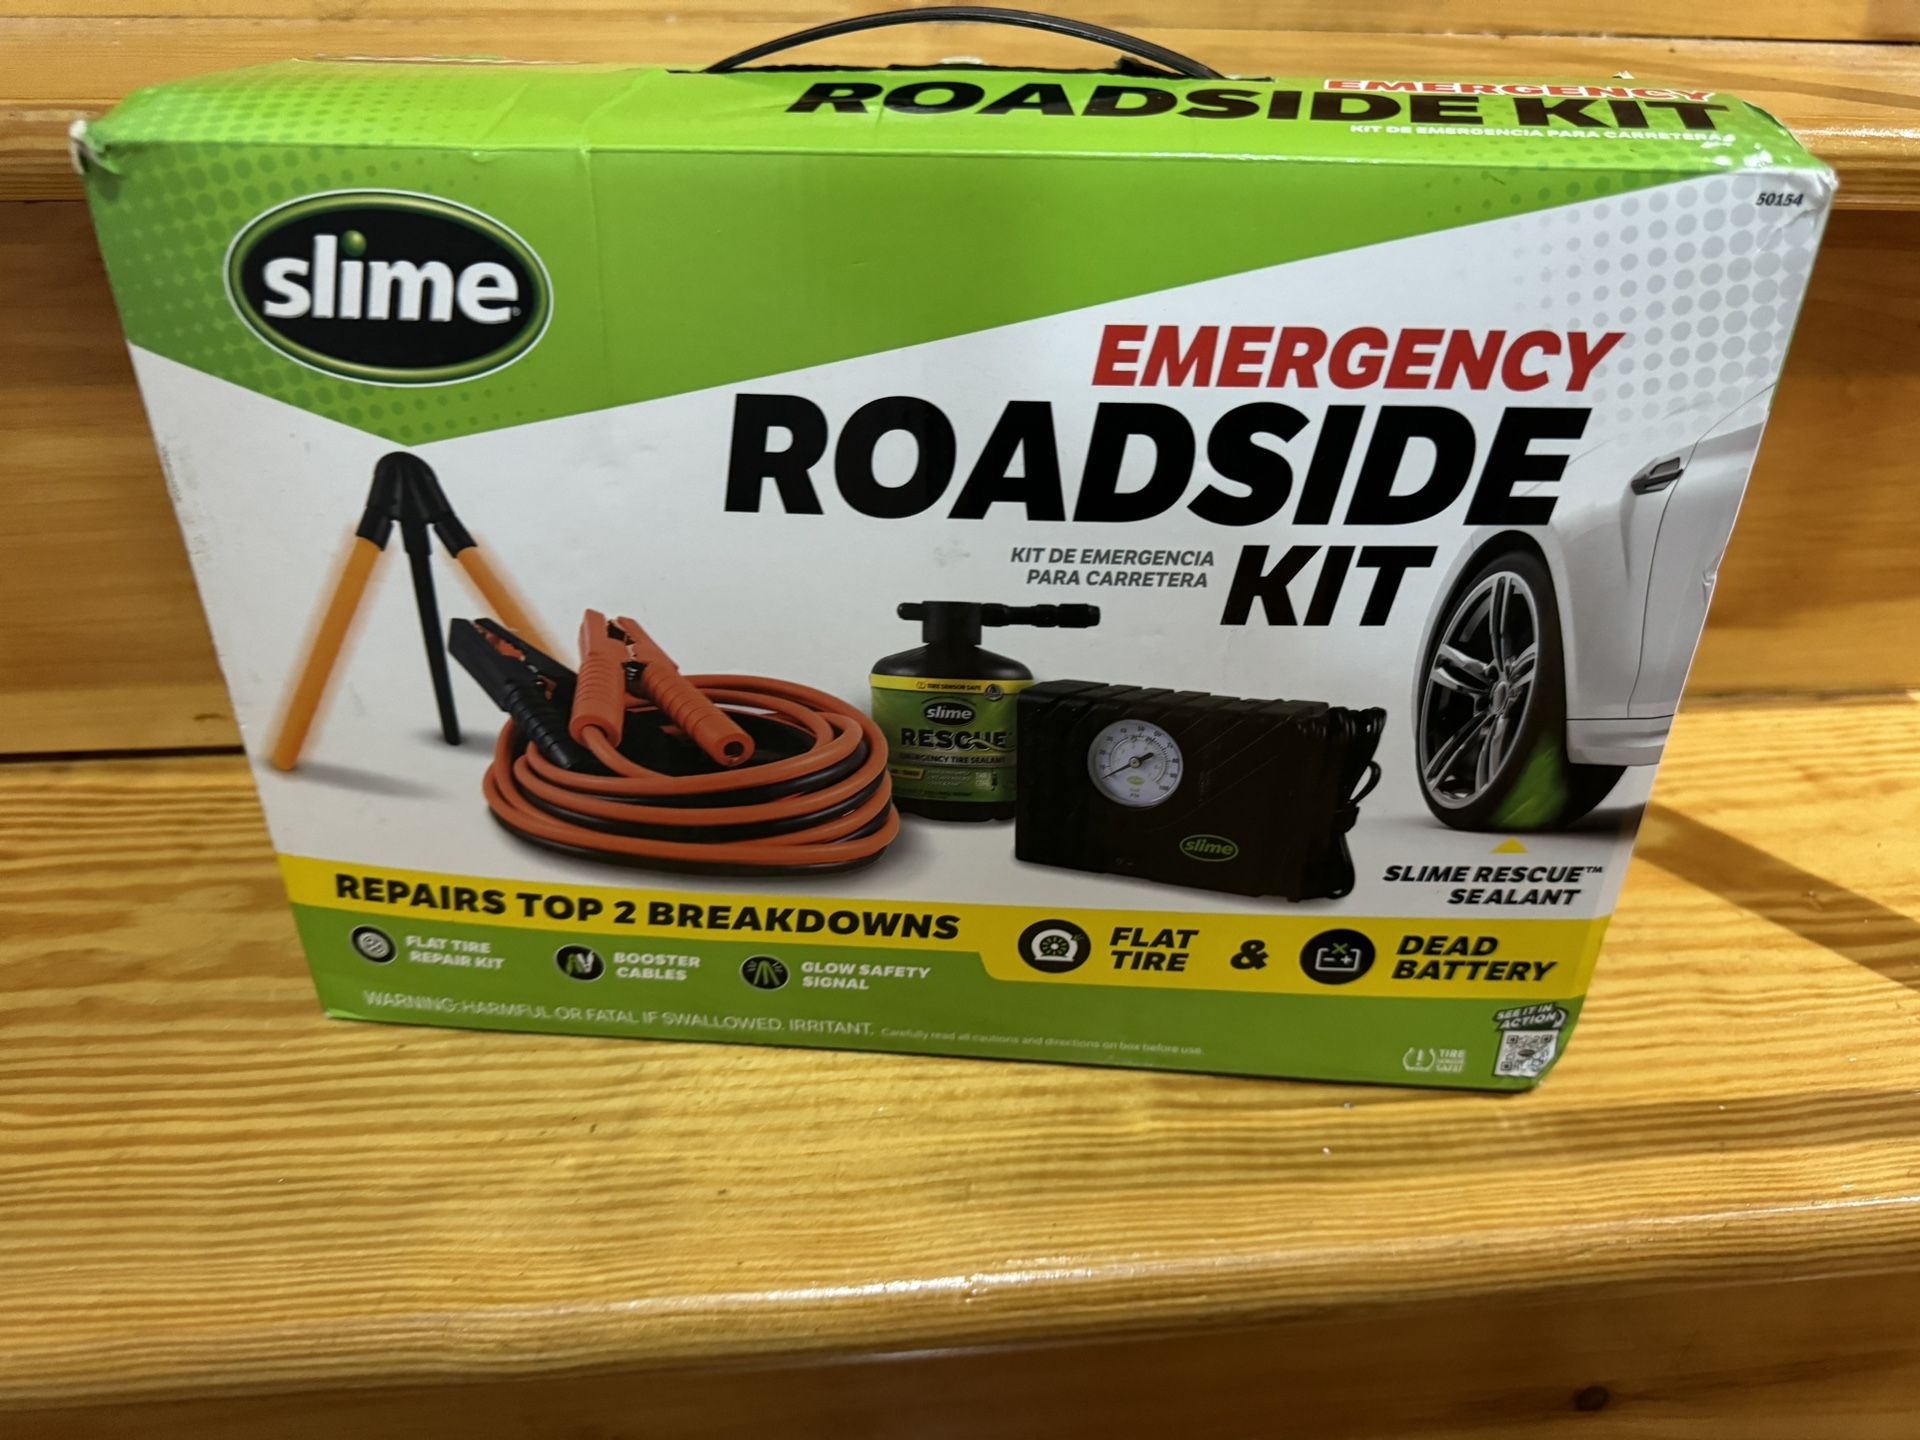 Slime Emergency Roadside Kit with Flat tire Repair and Booster Cables